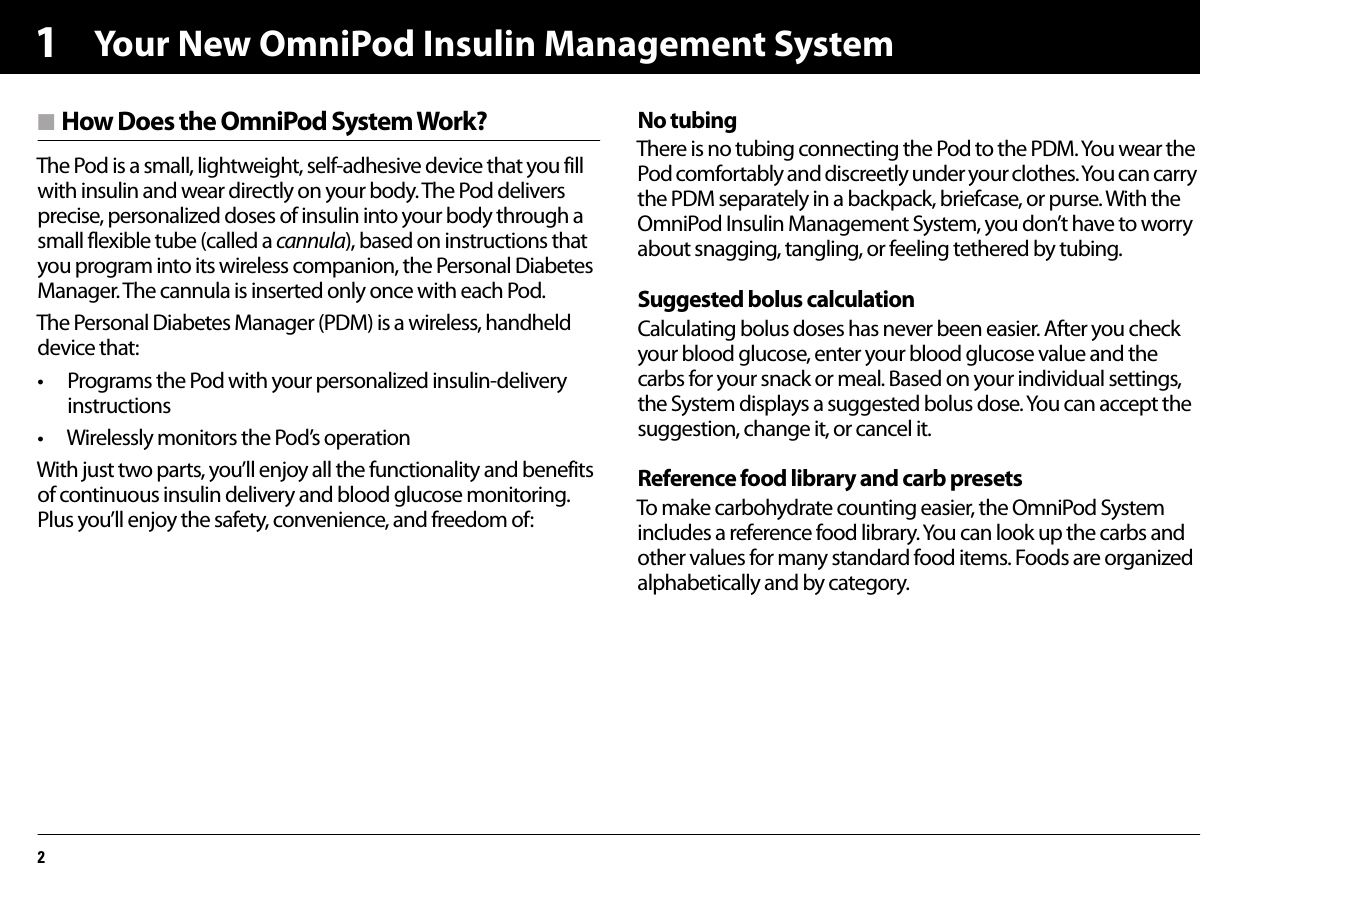 Your New OmniPod Insulin Management System21n How Does the OmniPod System Work?The Pod is a small, lightweight, self-adhesive device that you fill with insulin and wear directly on your body. The Pod delivers precise, personalized doses of insulin into your body through a small flexible tube (called a cannula), based on instructions that you program into its wireless companion, the Personal Diabetes Manager. The cannula is inserted only once with each Pod.The Personal Diabetes Manager (PDM) is a wireless, handheld device that:• Programs the Pod with your personalized insulin-delivery instructions• Wirelessly monitors the Pod’s operationWith just two parts, you’ll enjoy all the functionality and benefits of continuous insulin delivery and blood glucose monitoring. Plus you’ll enjoy the safety, convenience, and freedom of:No tubingThere is no tubing connecting the Pod to the PDM. You wear the Pod comfortably and discreetly under your clothes. You can carry the PDM separately in a backpack, briefcase, or purse. With the OmniPod Insulin Management System, you don’t have to worry about snagging, tangling, or feeling tethered by tubing.Suggested bolus calculationCalculating bolus doses has never been easier. After you check your blood glucose, enter your blood glucose value and the carbs for your snack or meal. Based on your individual settings, the System displays a suggested bolus dose. You can accept the suggestion, change it, or cancel it.Reference food library and carb presetsTo make carbohydrate counting easier, the OmniPod System includes a reference food library. You can look up the carbs and other values for many standard food items. Foods are organized alphabetically and by category.